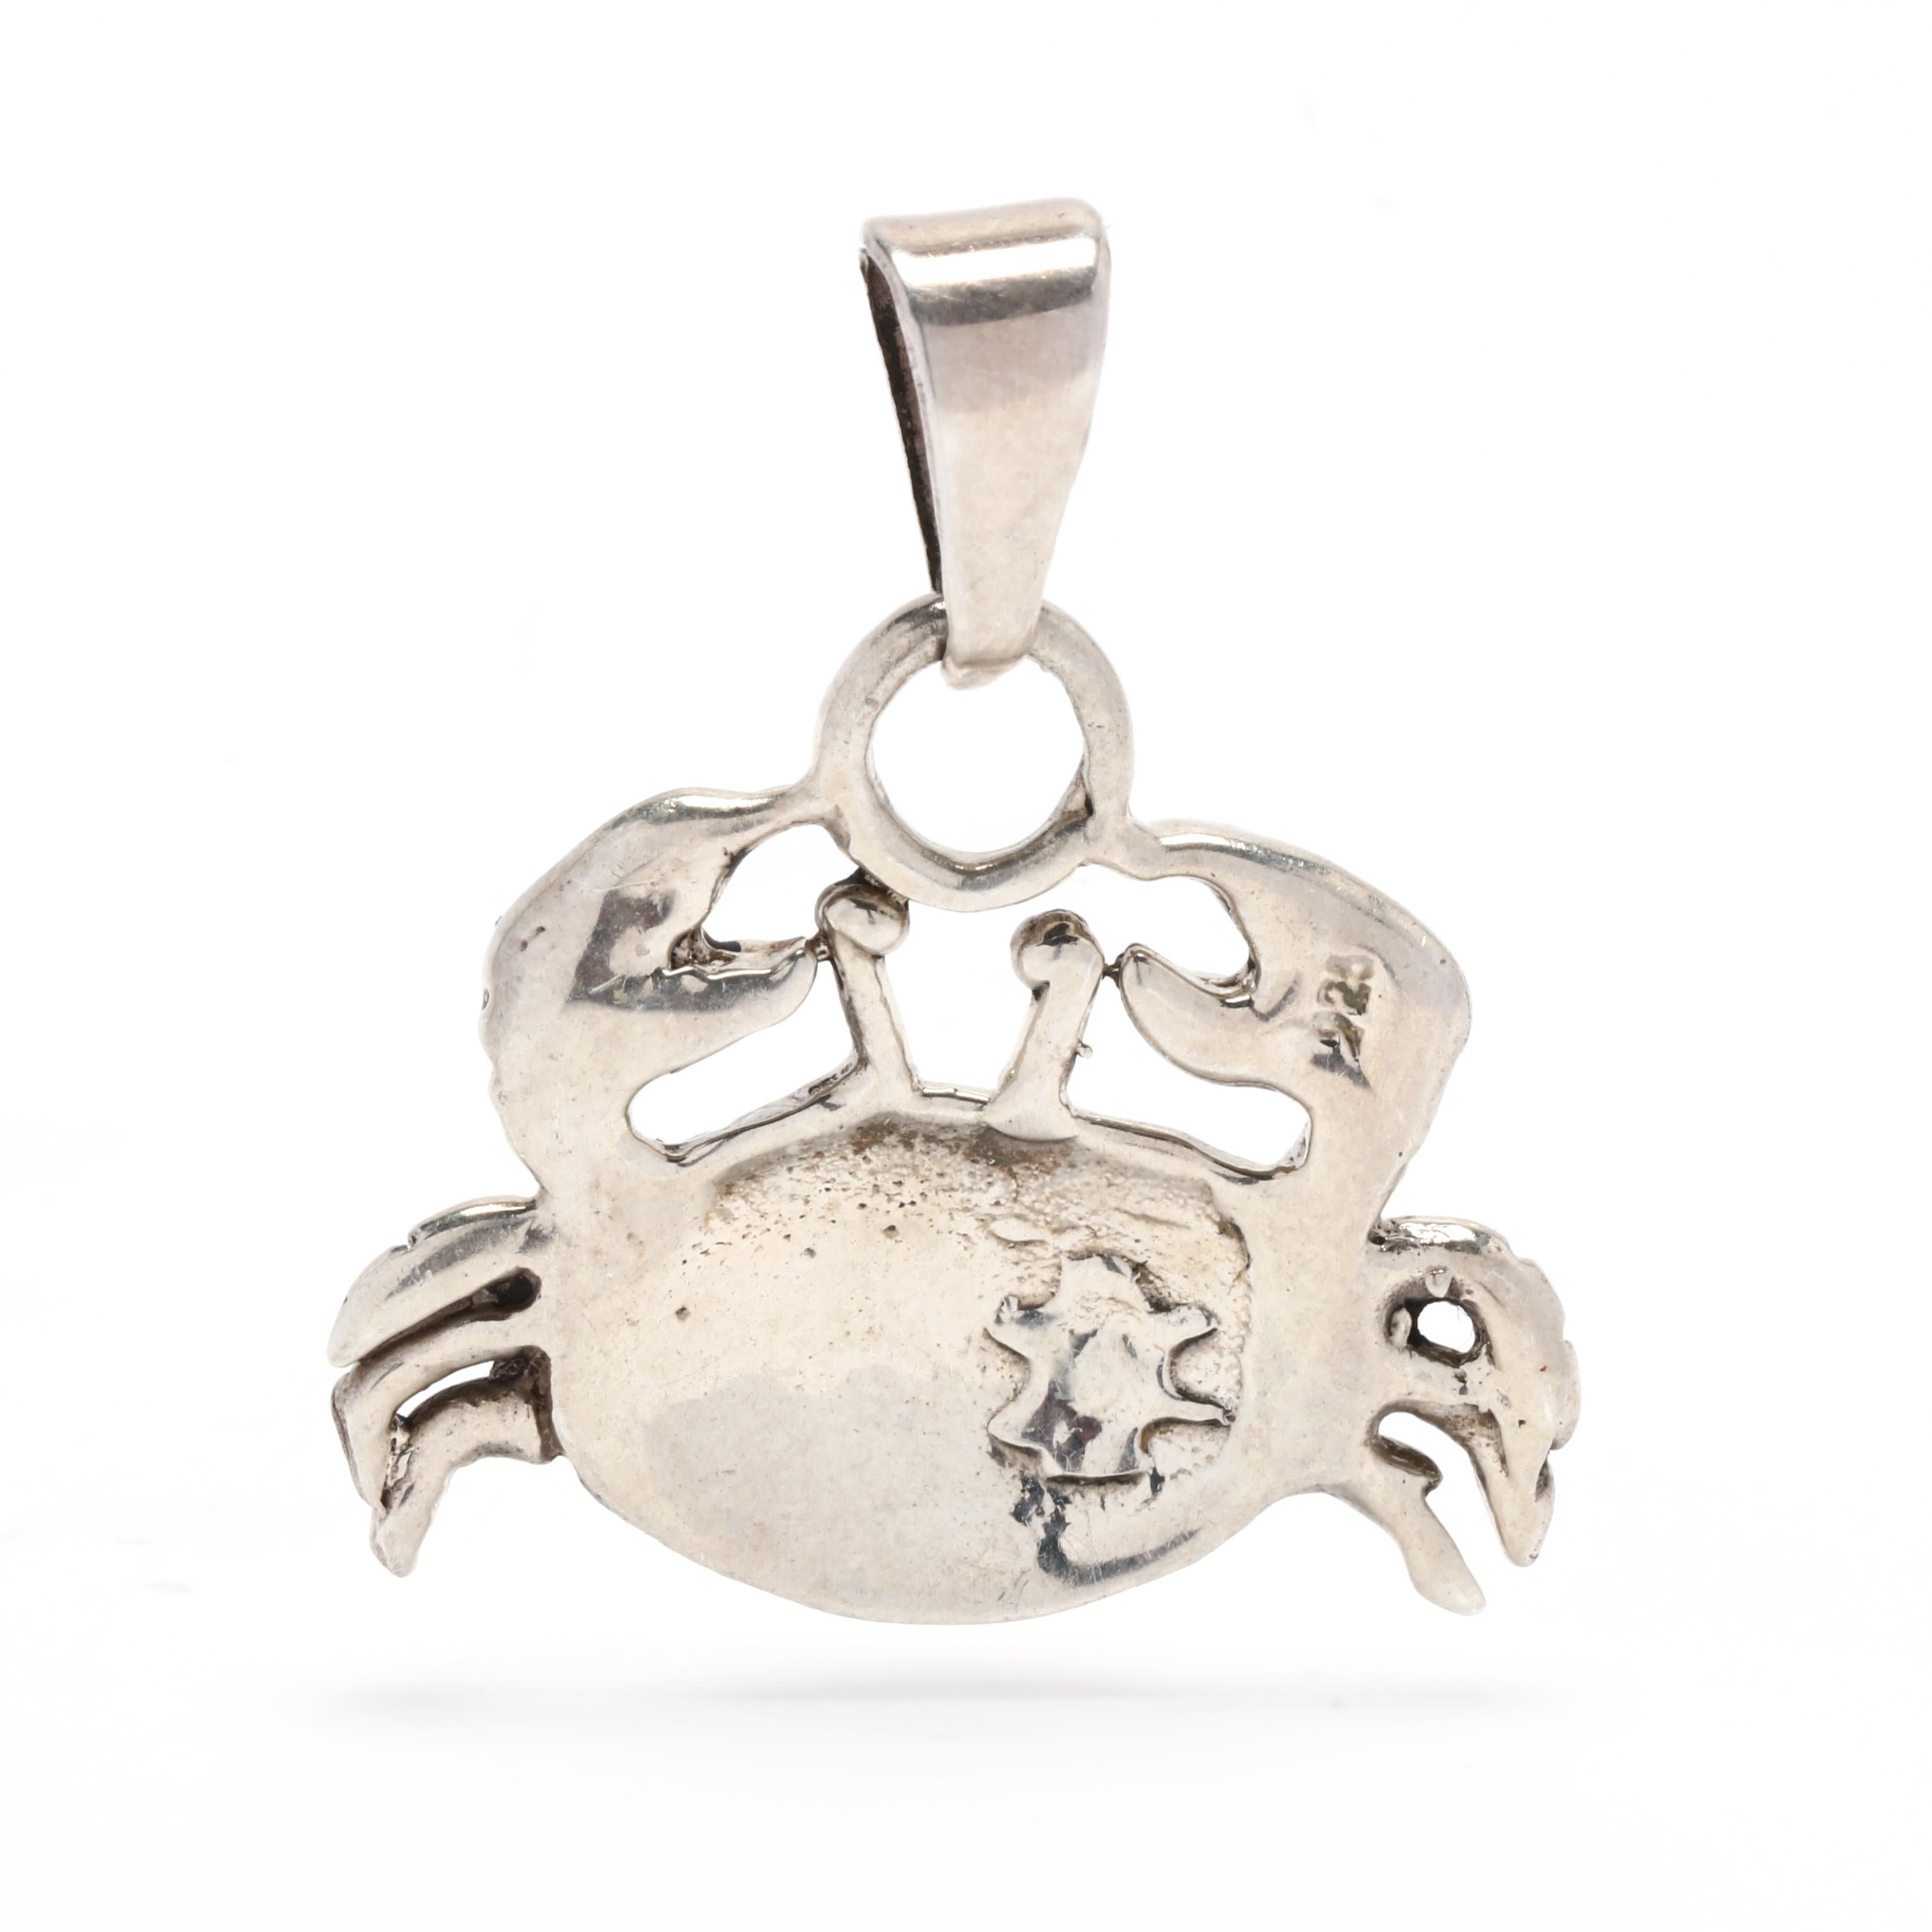 This gorgeous sterling silver crab pendant is the perfect addition to any outfit! Crafted in Massachusetts, it measures 1.25 inches and comes with a sterling silver chain. This pendant is perfect for a special occasion, or to add a touch of coastal